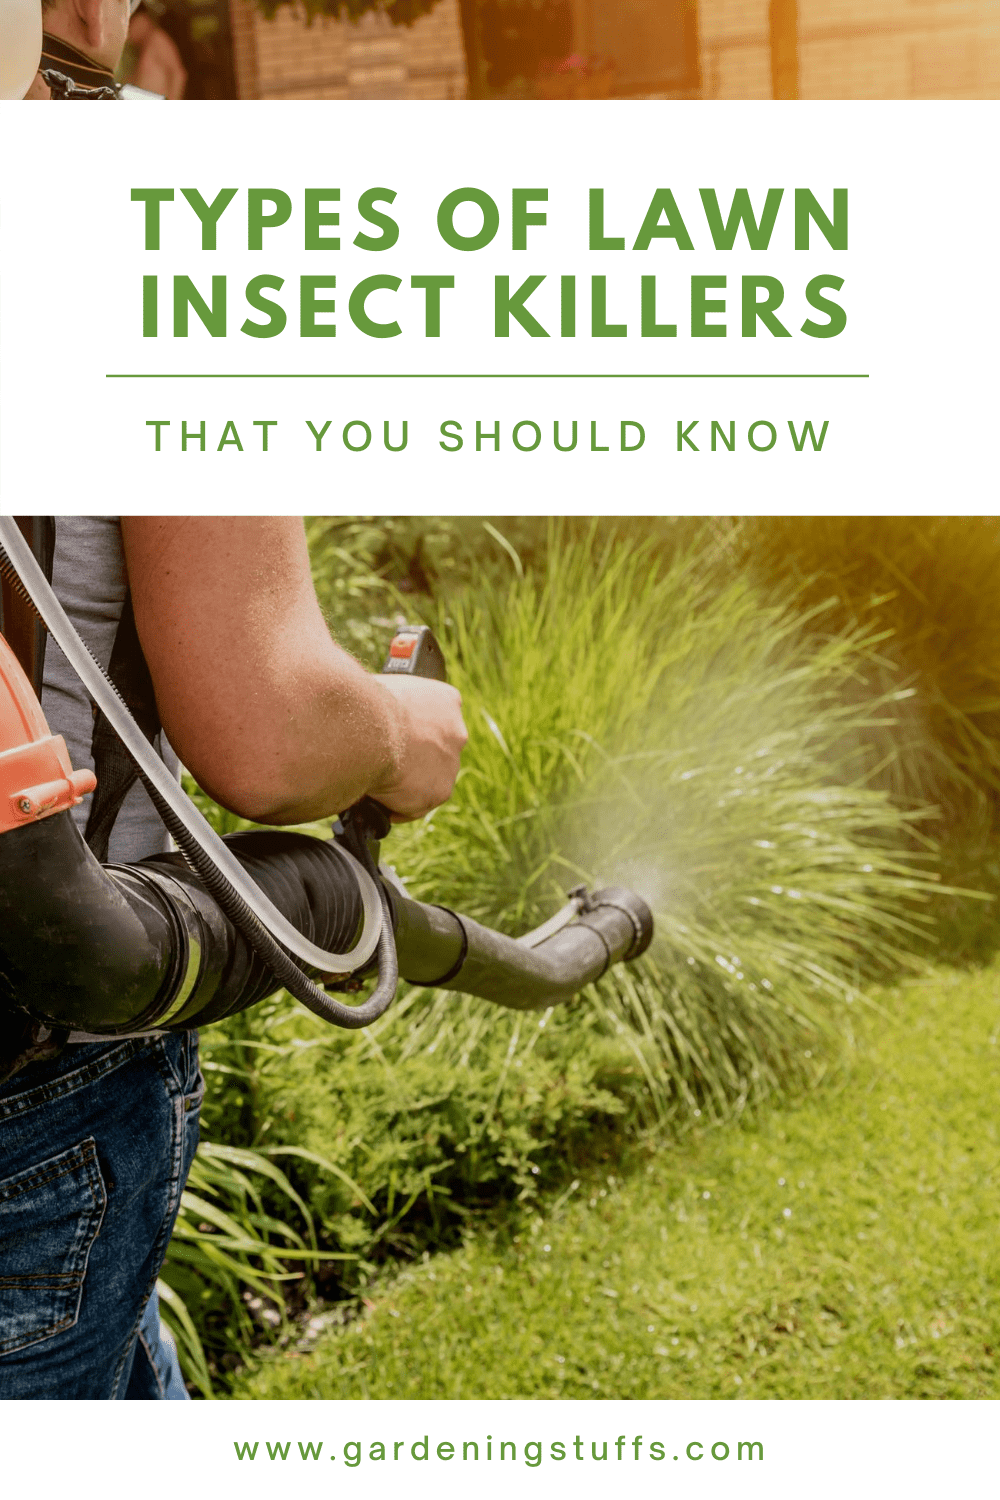 In this guide, you'll learn about the different types of lawn insect killer, how to decide on what you need, and see reviews for the best picks.